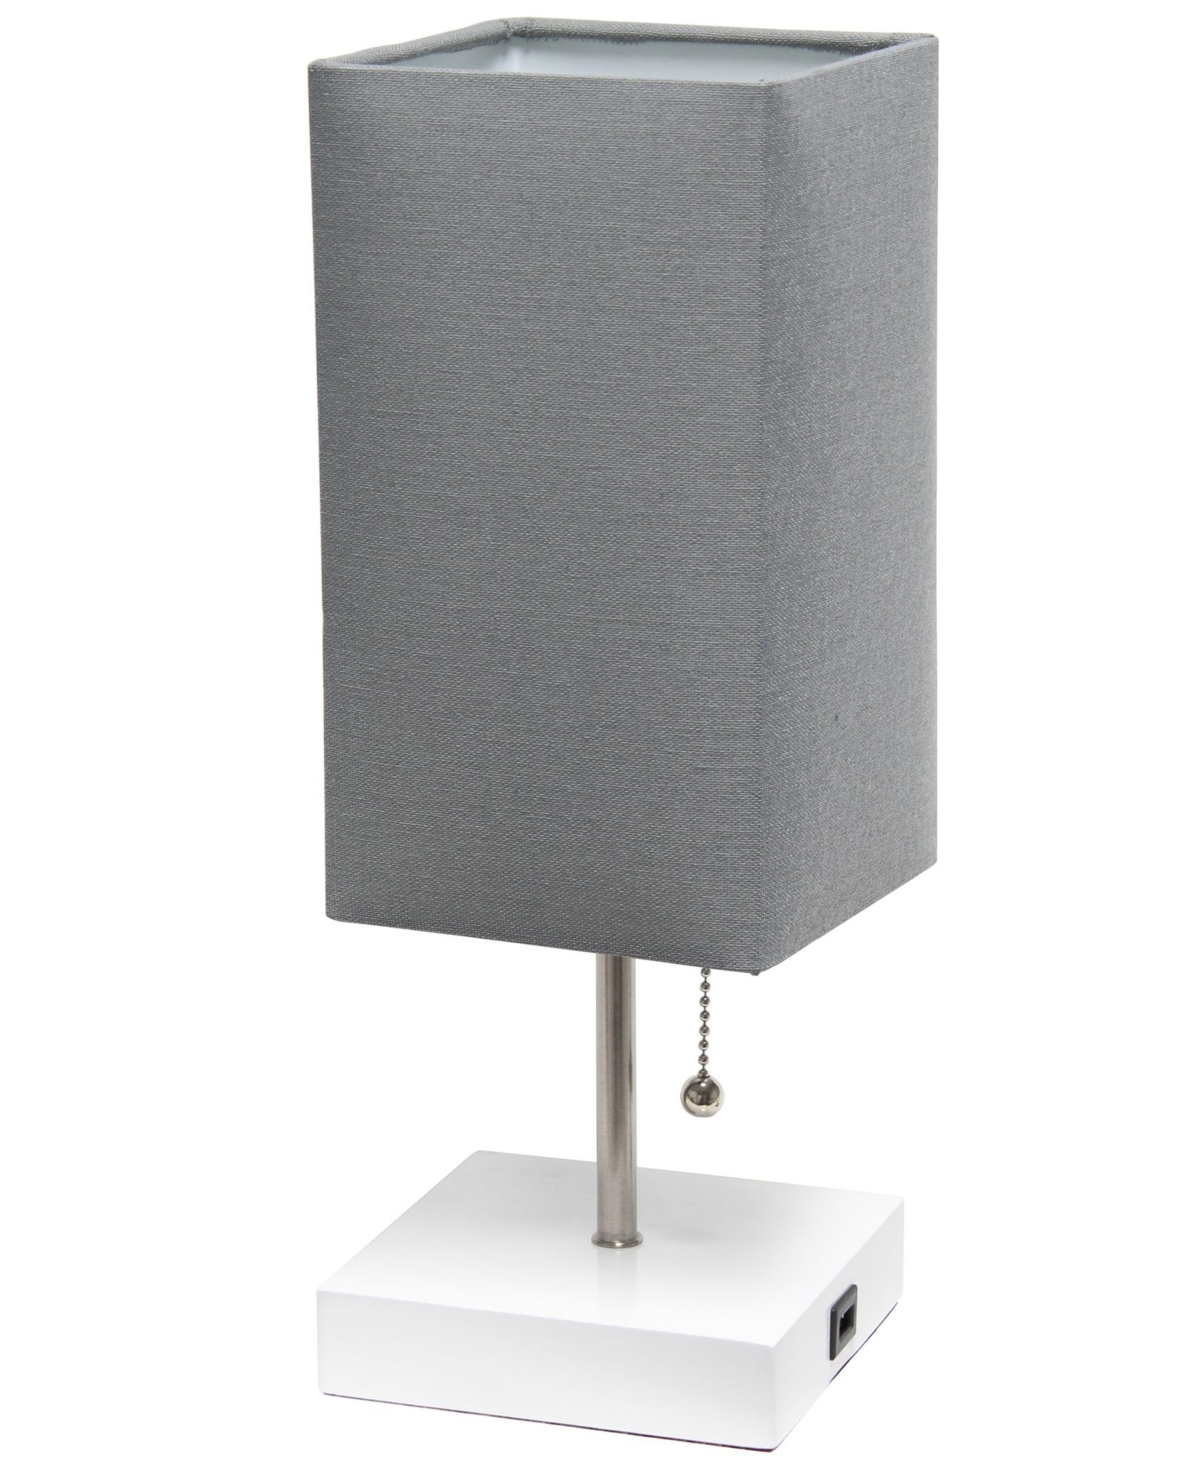 Simple Designs Petite Stick Lamp With Usb Charging Port And Shade In Gray Shade,white Base